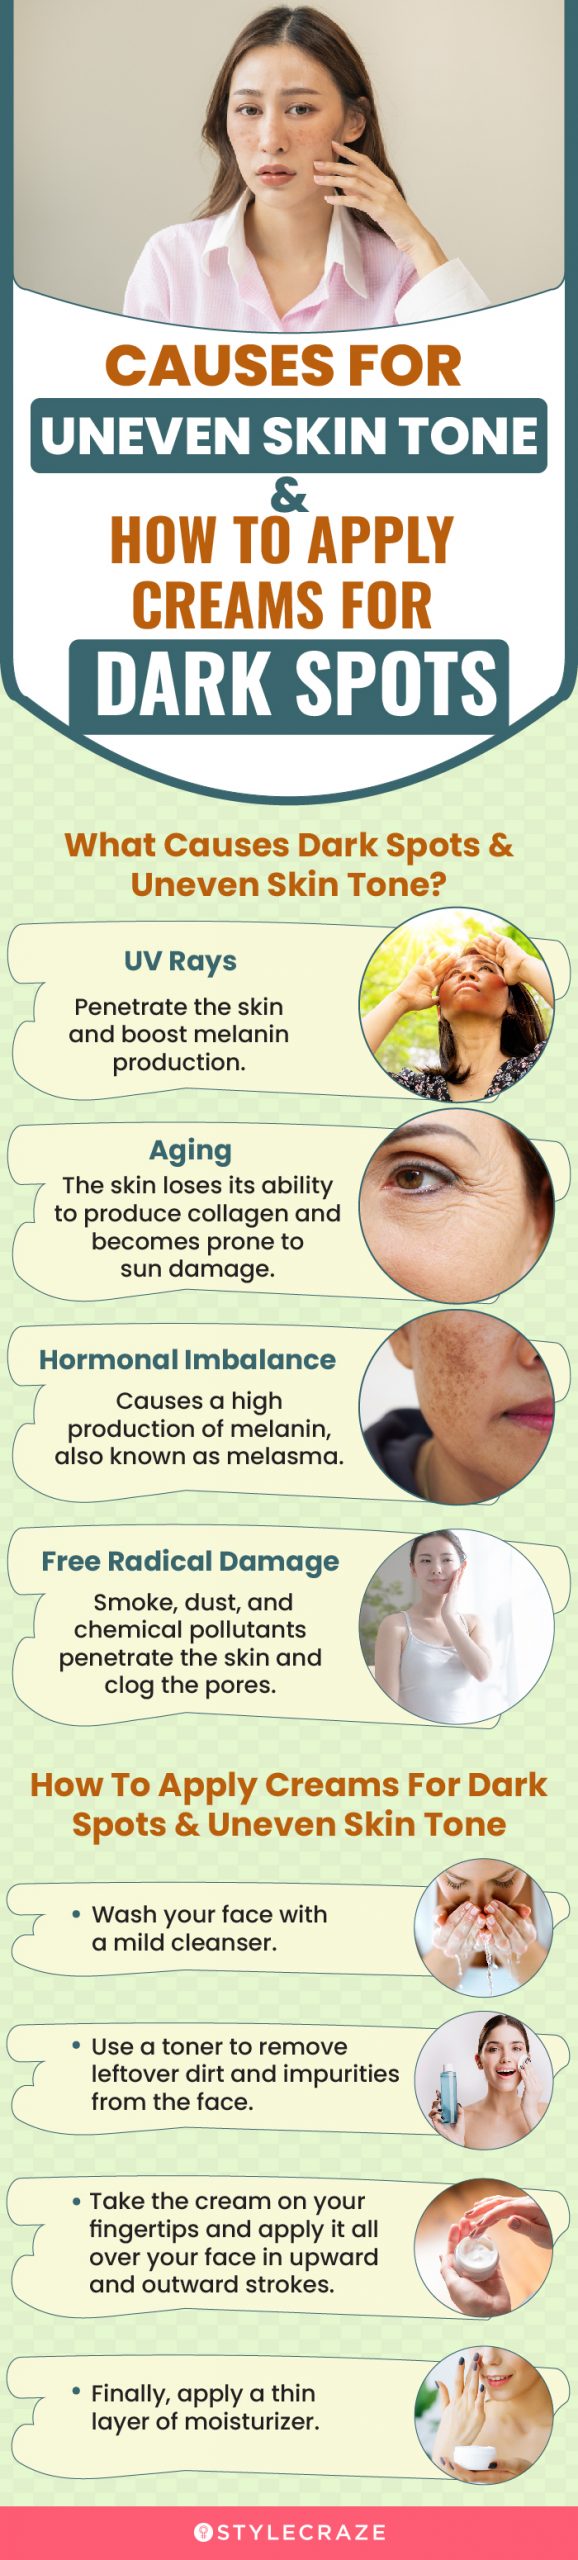 Causes For Uneven Skin Tone & How To Apply Creams For Dark Spots (infographic)